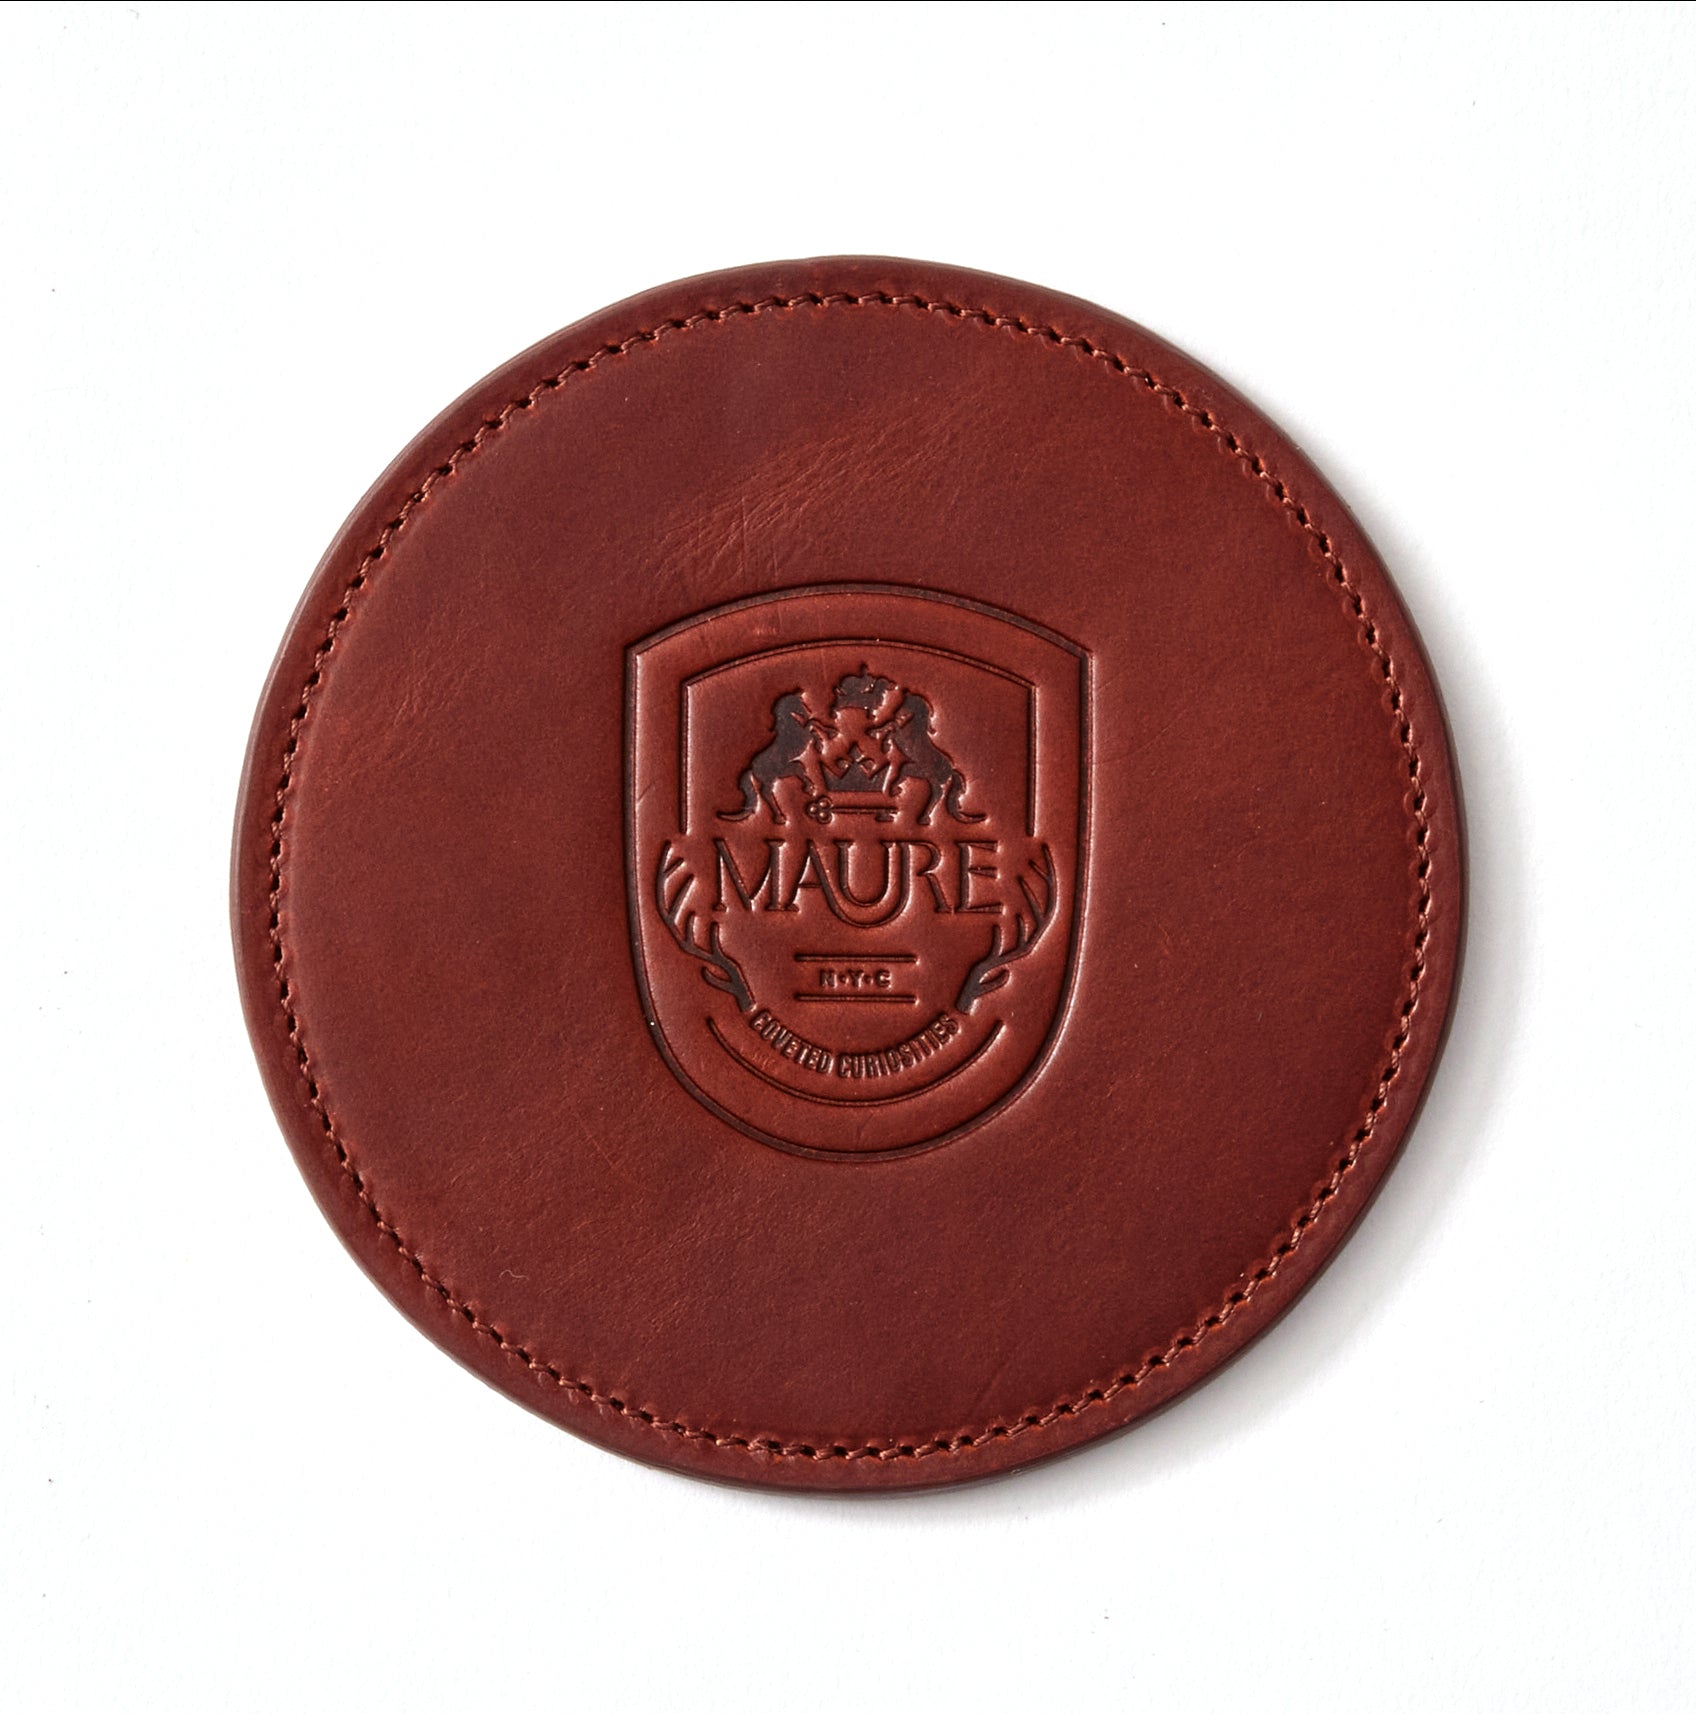 a brown leather coaster with a logo on it